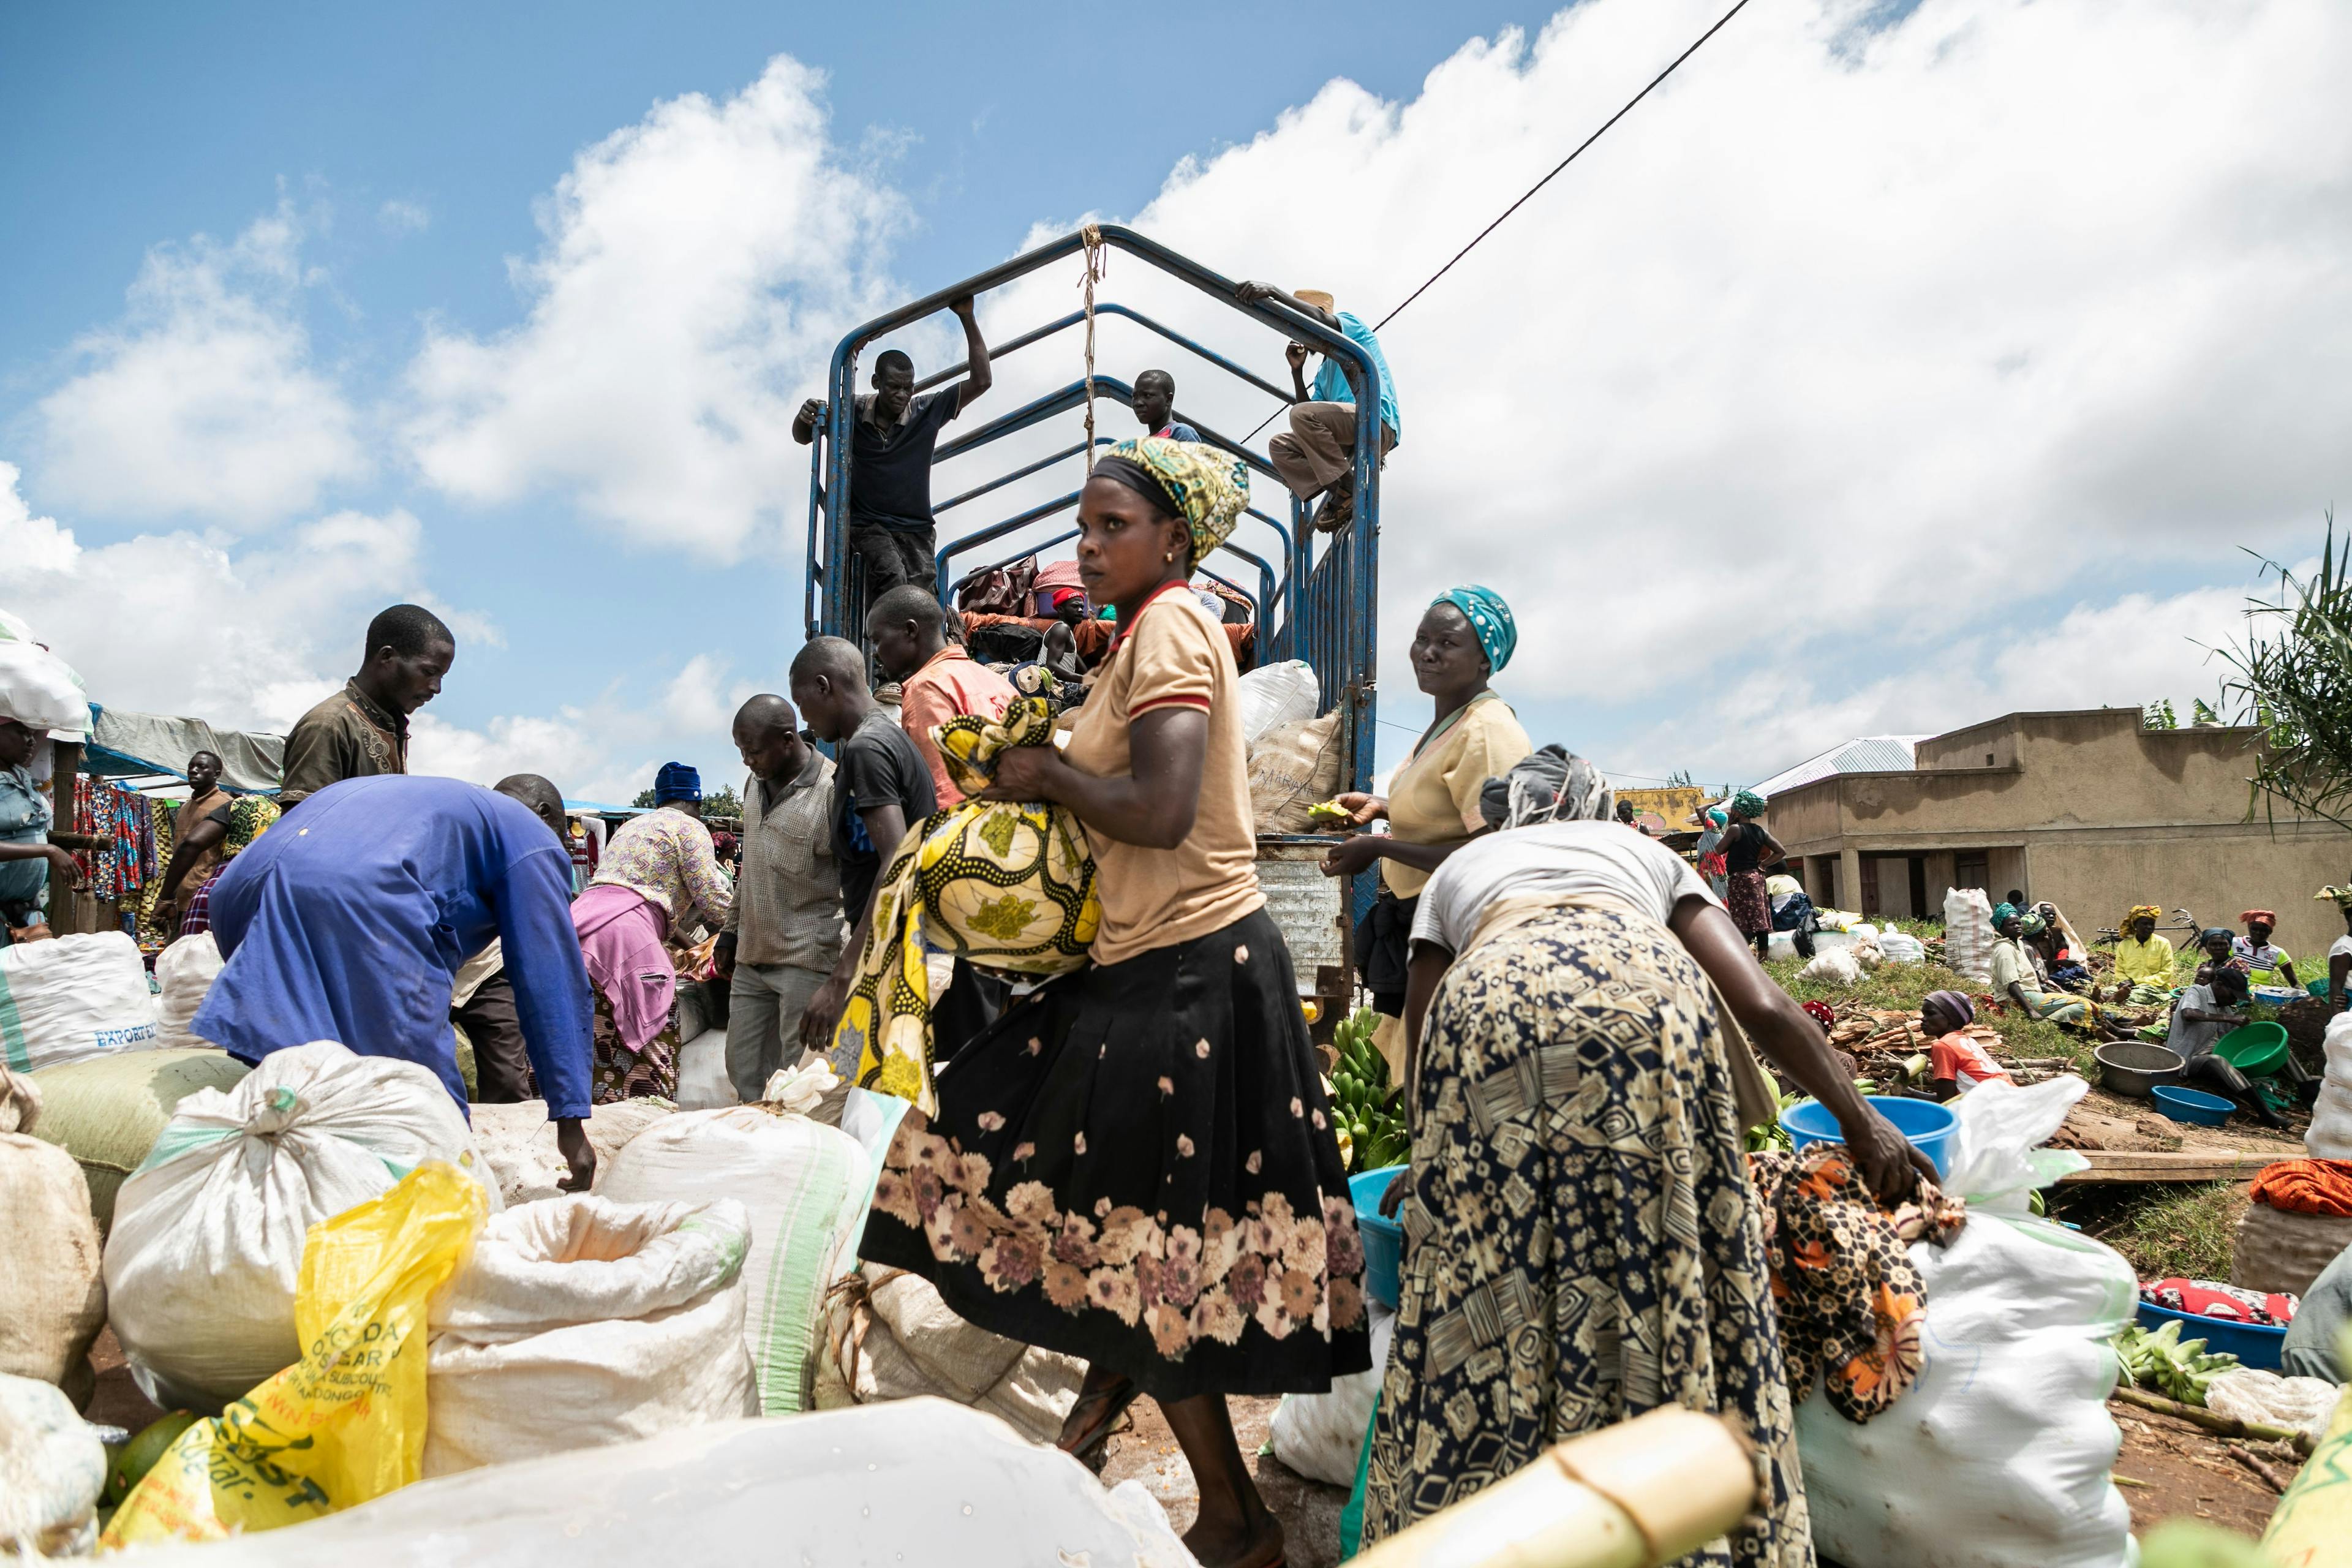 Borderlands typically have strong trade and travel ties. Women traders are at the heart of a vibrant supply chain that feeds local markets. They buy fresh produce such as rice, bananas, and ground nuts imported from the DRC to sell in Arua.